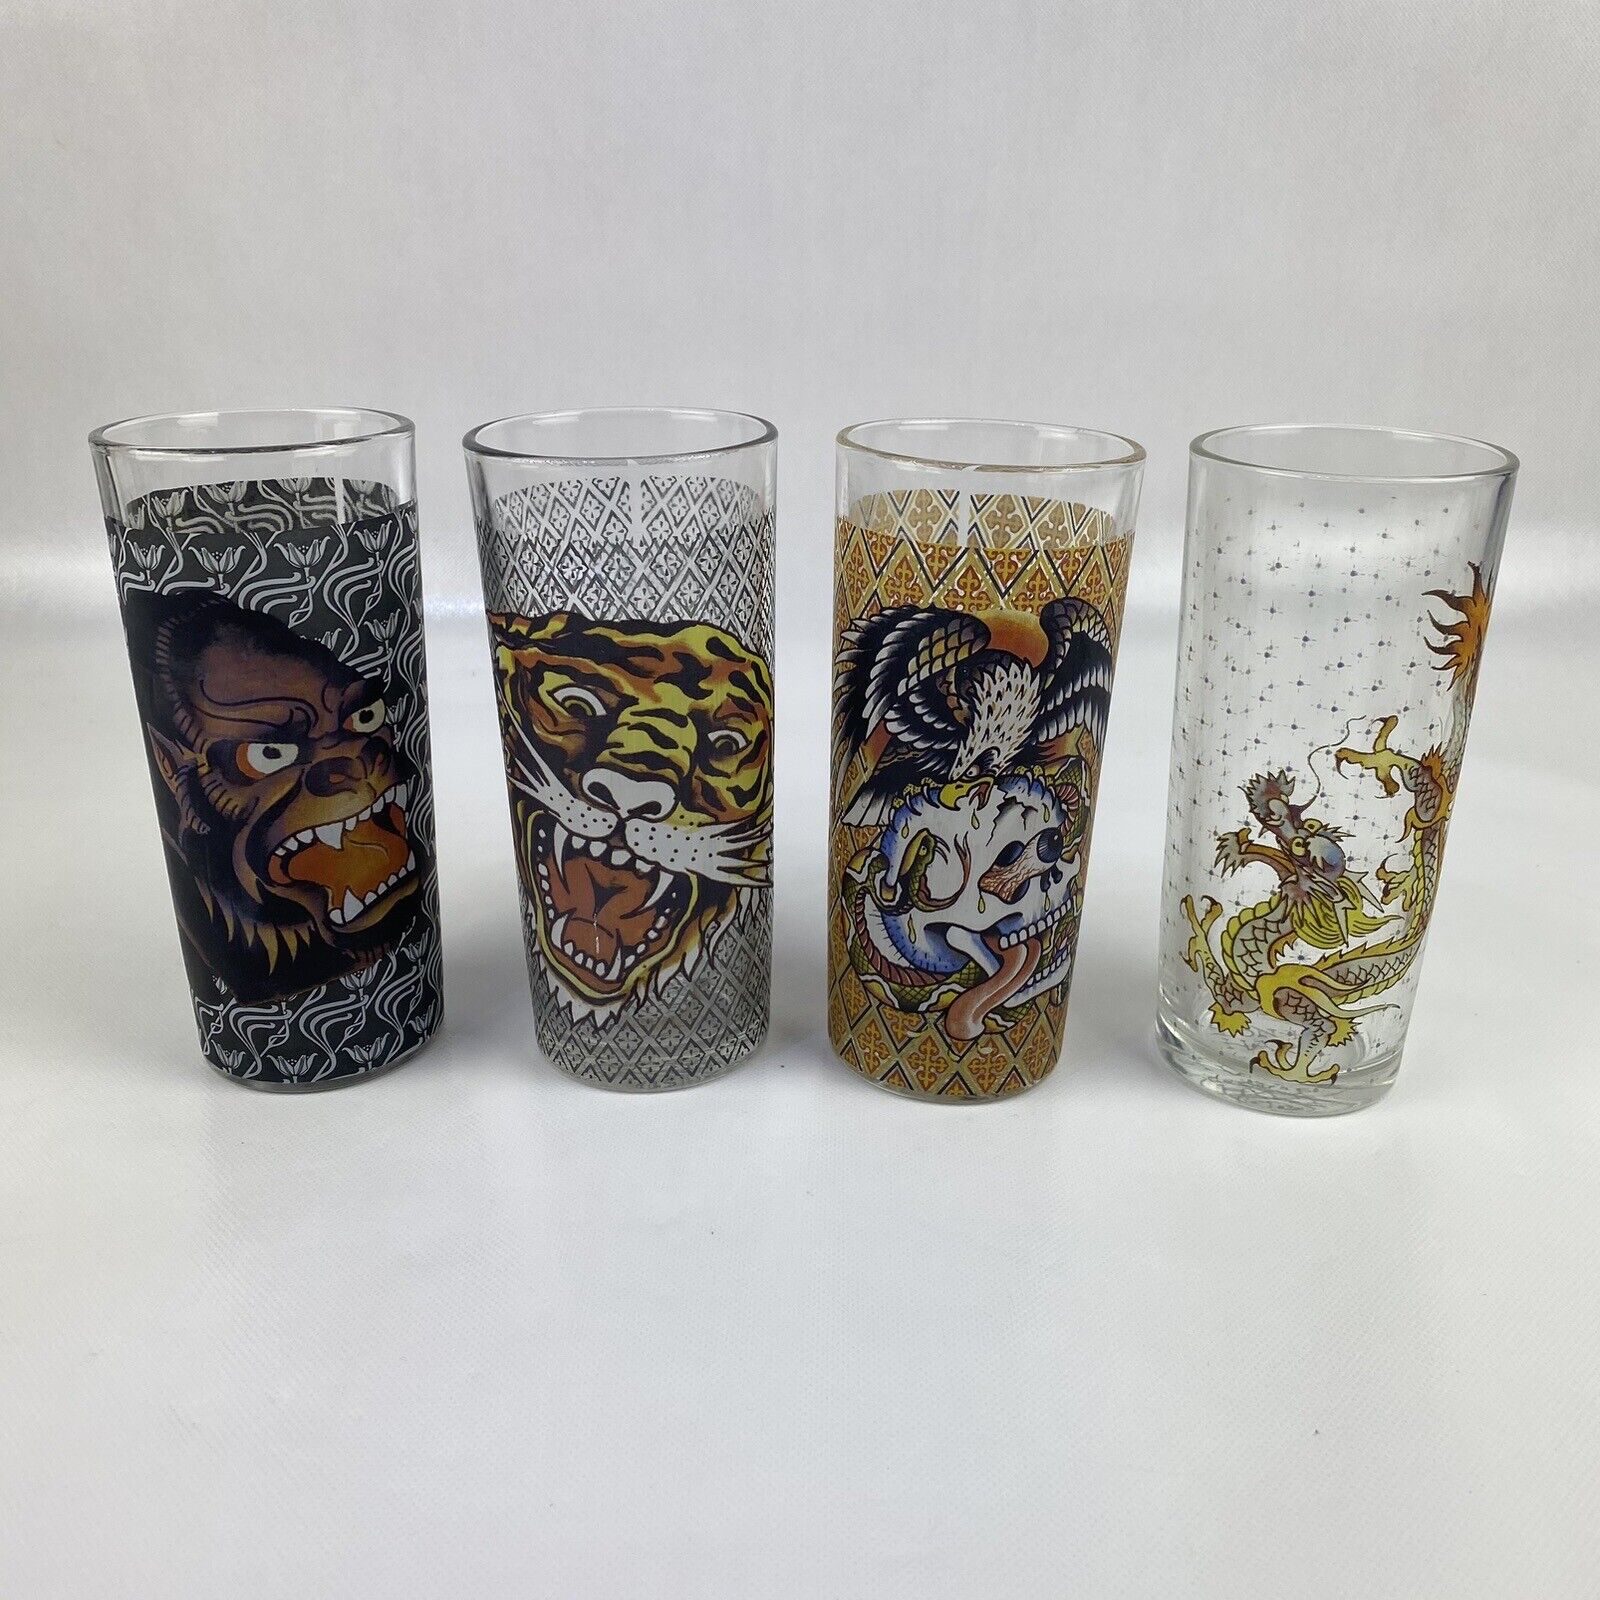 Vintage Don Ed Hardy Designs 6.25 Inch Glasses Set of 4 - Excellent Condition